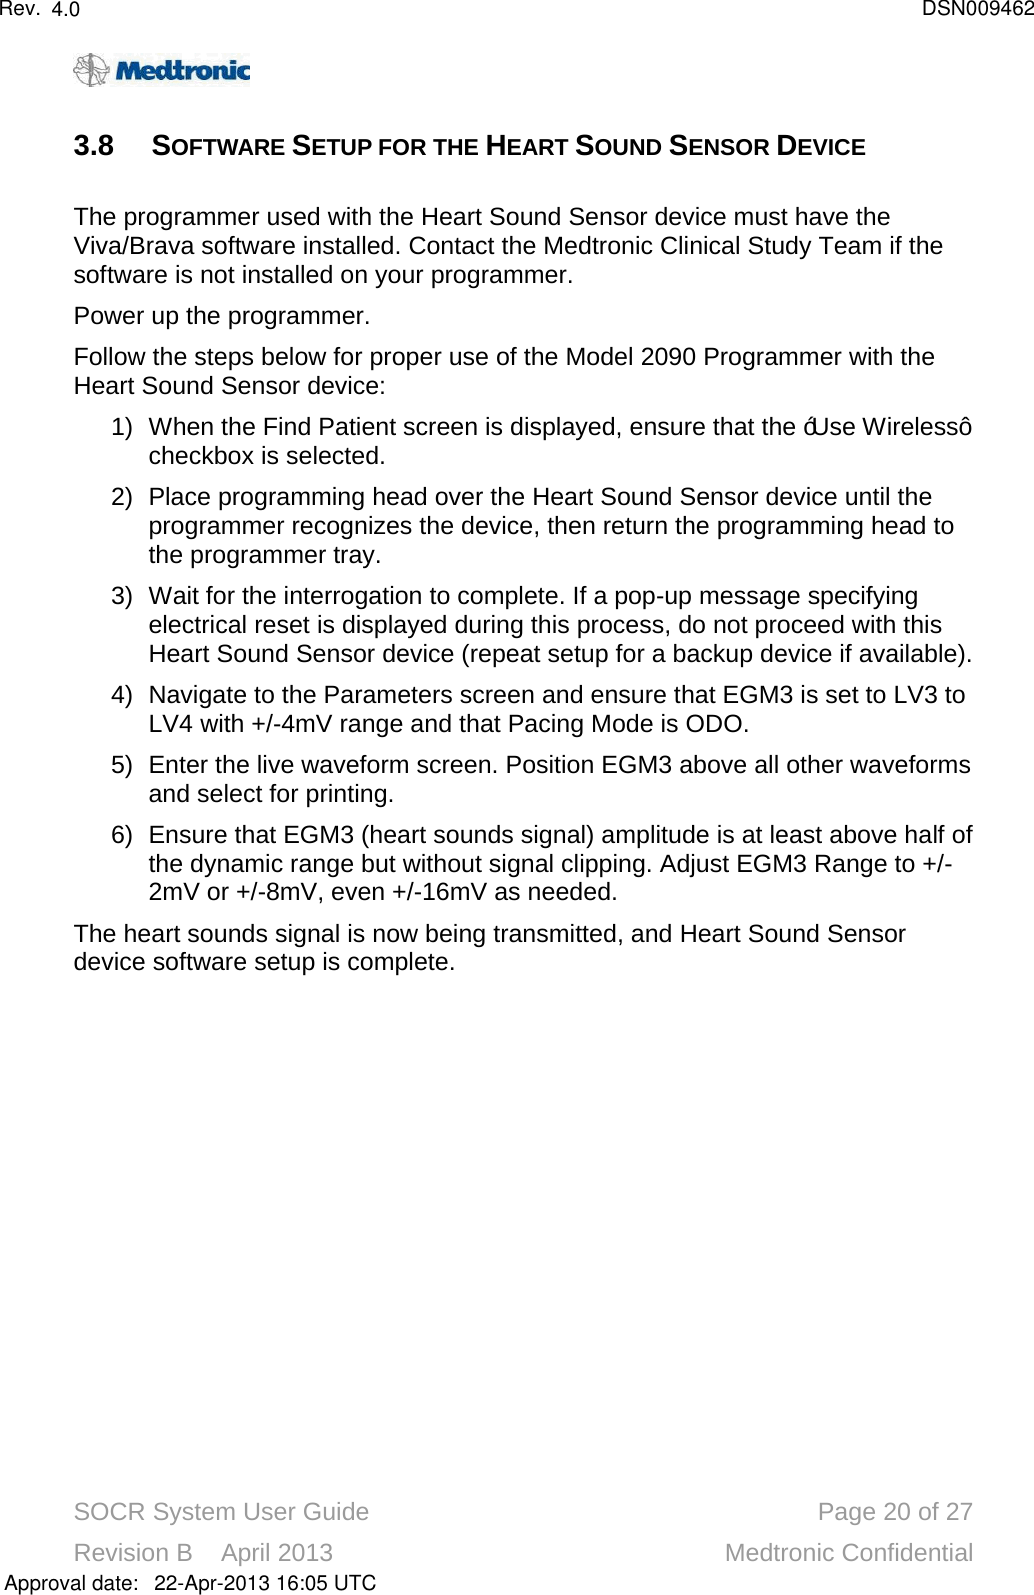 SOCR System User Guide Page 20 of 27Revision B    April 2013 Medtronic Confidential3.8 SOFTWARE SETUP FOR THE HEART SOUND SENSOR DEVICEThe programmer used with the Heart Sound Sensor device must have the Viva/Brava software installed. Contact the Medtronic Clinical Study Team if the software is not installed on your programmer.Power up the programmer. Follow the steps below for proper use of the Model 2090 Programmer with the Heart Sound Sensor device:1) When the Find Patient screen is displayed, ensure that the “Use Wireless” checkbox is selected. 2) Place programming head over the Heart Sound Sensor device until the programmer recognizes the device, then return the programming head to the programmer tray.3) Wait for the interrogation to complete. If a pop-up message specifyingelectrical reset is displayed during this process, do not proceed with this Heart Sound Sensor device (repeat setup for a backup device if available).4) Navigate to the Parameters screen and ensure that EGM3 is set to LV3 to LV4 with +/-4mV range and that Pacing Mode is ODO. 5) Enter the live waveform screen. Position EGM3 above all other waveforms and select for printing.6) Ensure that EGM3 (heart sounds signal) amplitude is at least above half of the dynamic range but without signal clipping. Adjust EGM3 Range to +/-2mV or +/-8mV, even +/-16mV as needed.The heart sounds signal is now being transmitted, and Heart Sound Sensordevice software setup is complete. Approval date:4.0 DSN00946222-Apr-2013 16:05 UTCRev.